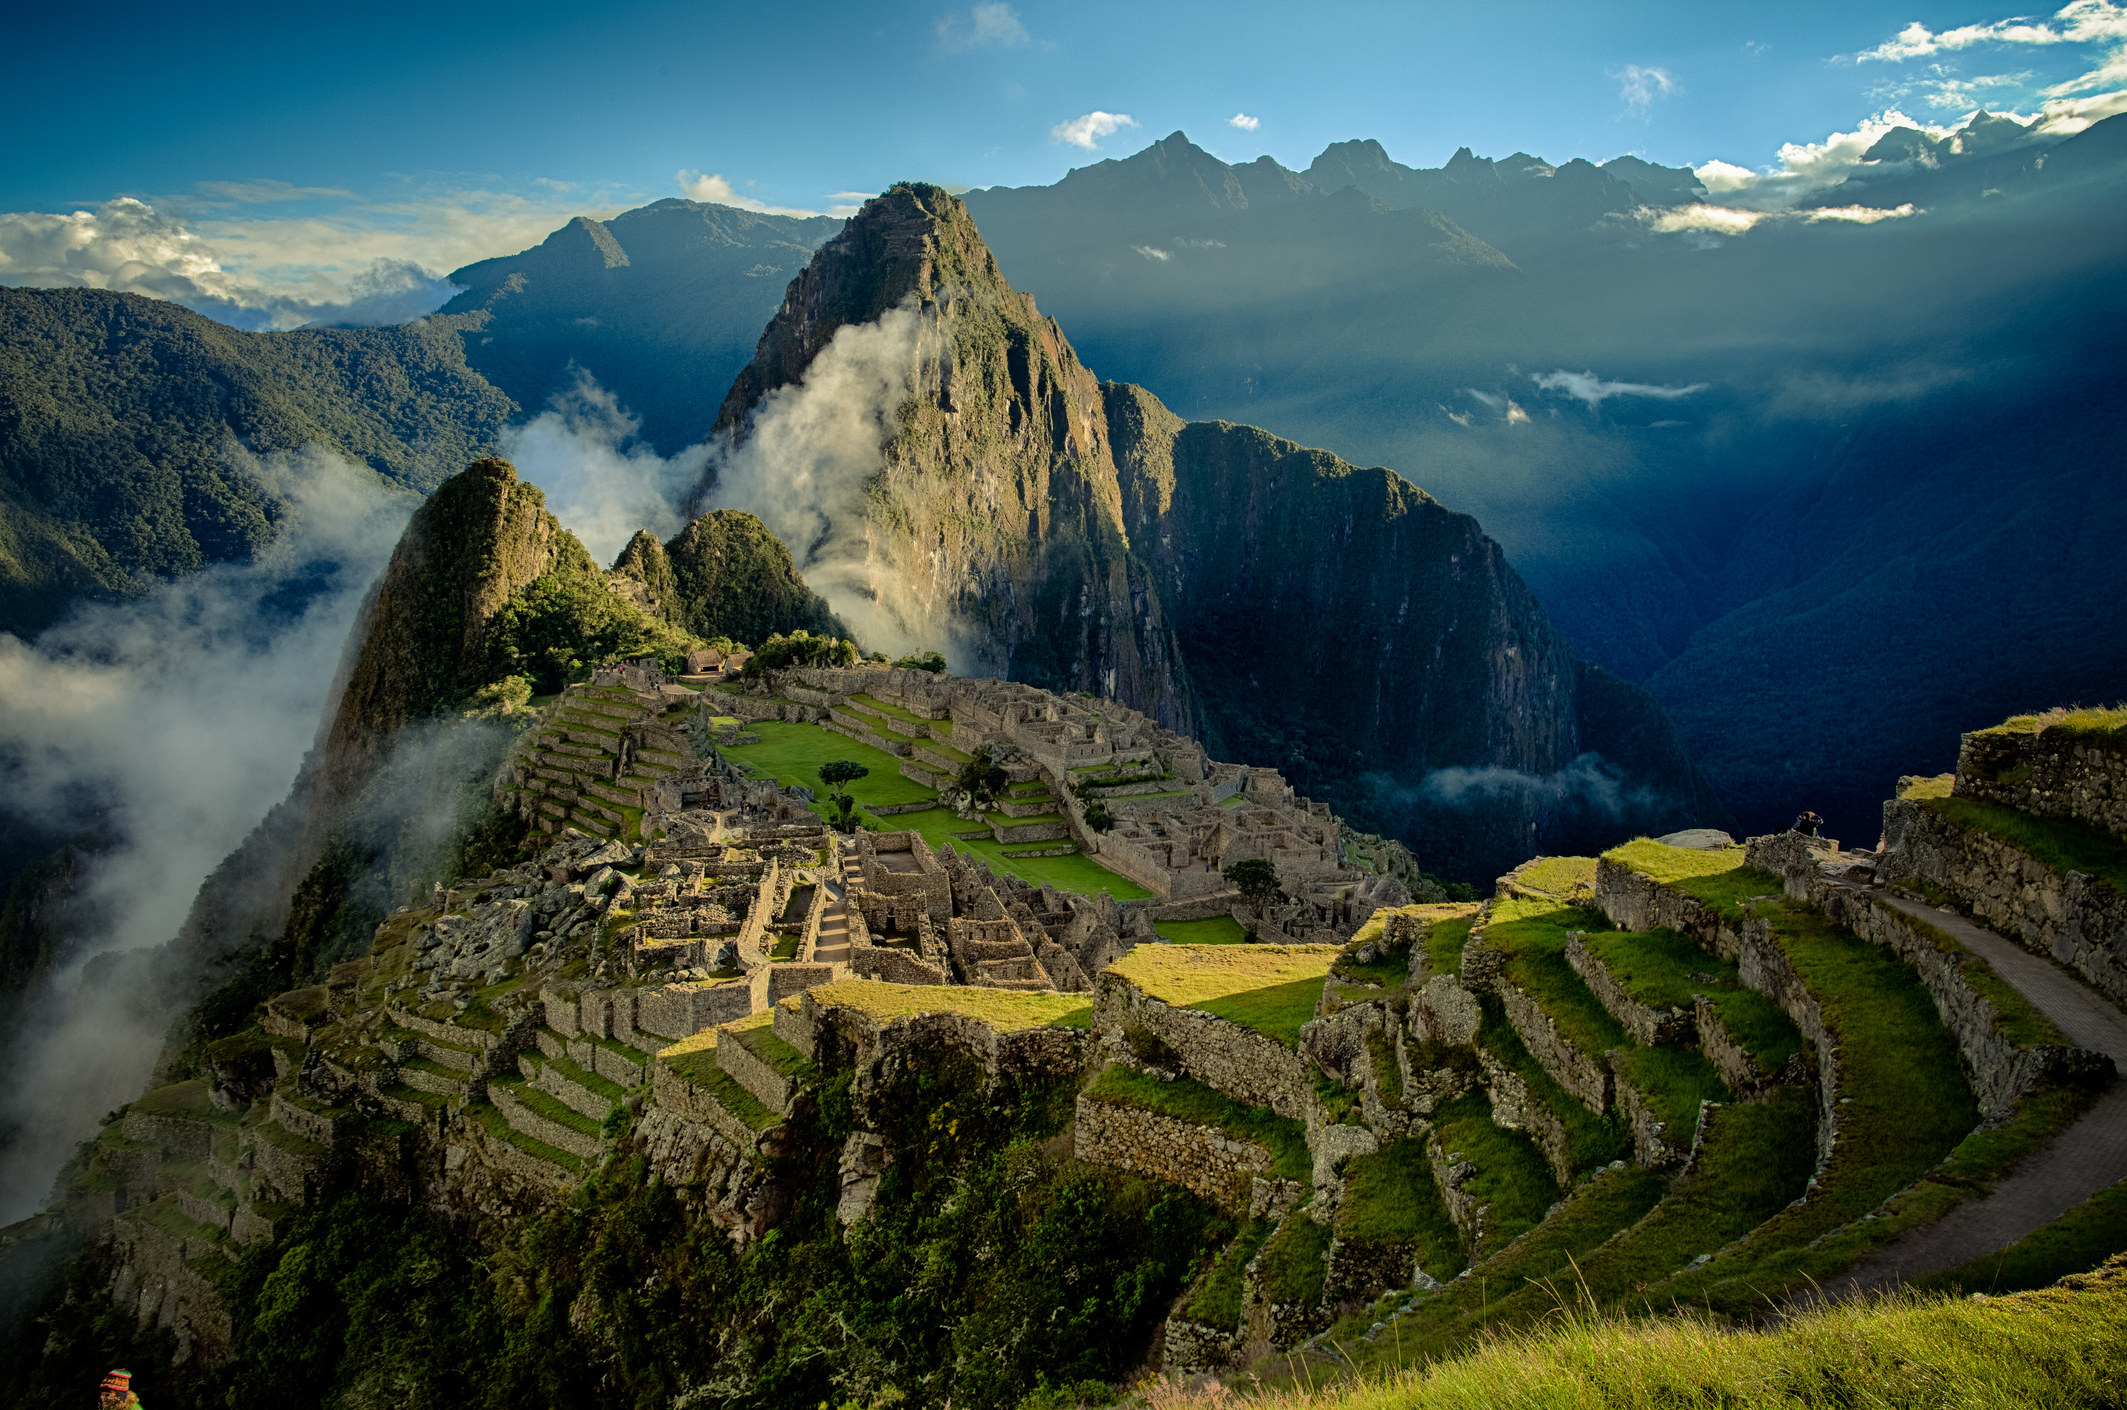 Machu Picchu surrounded by clouds.